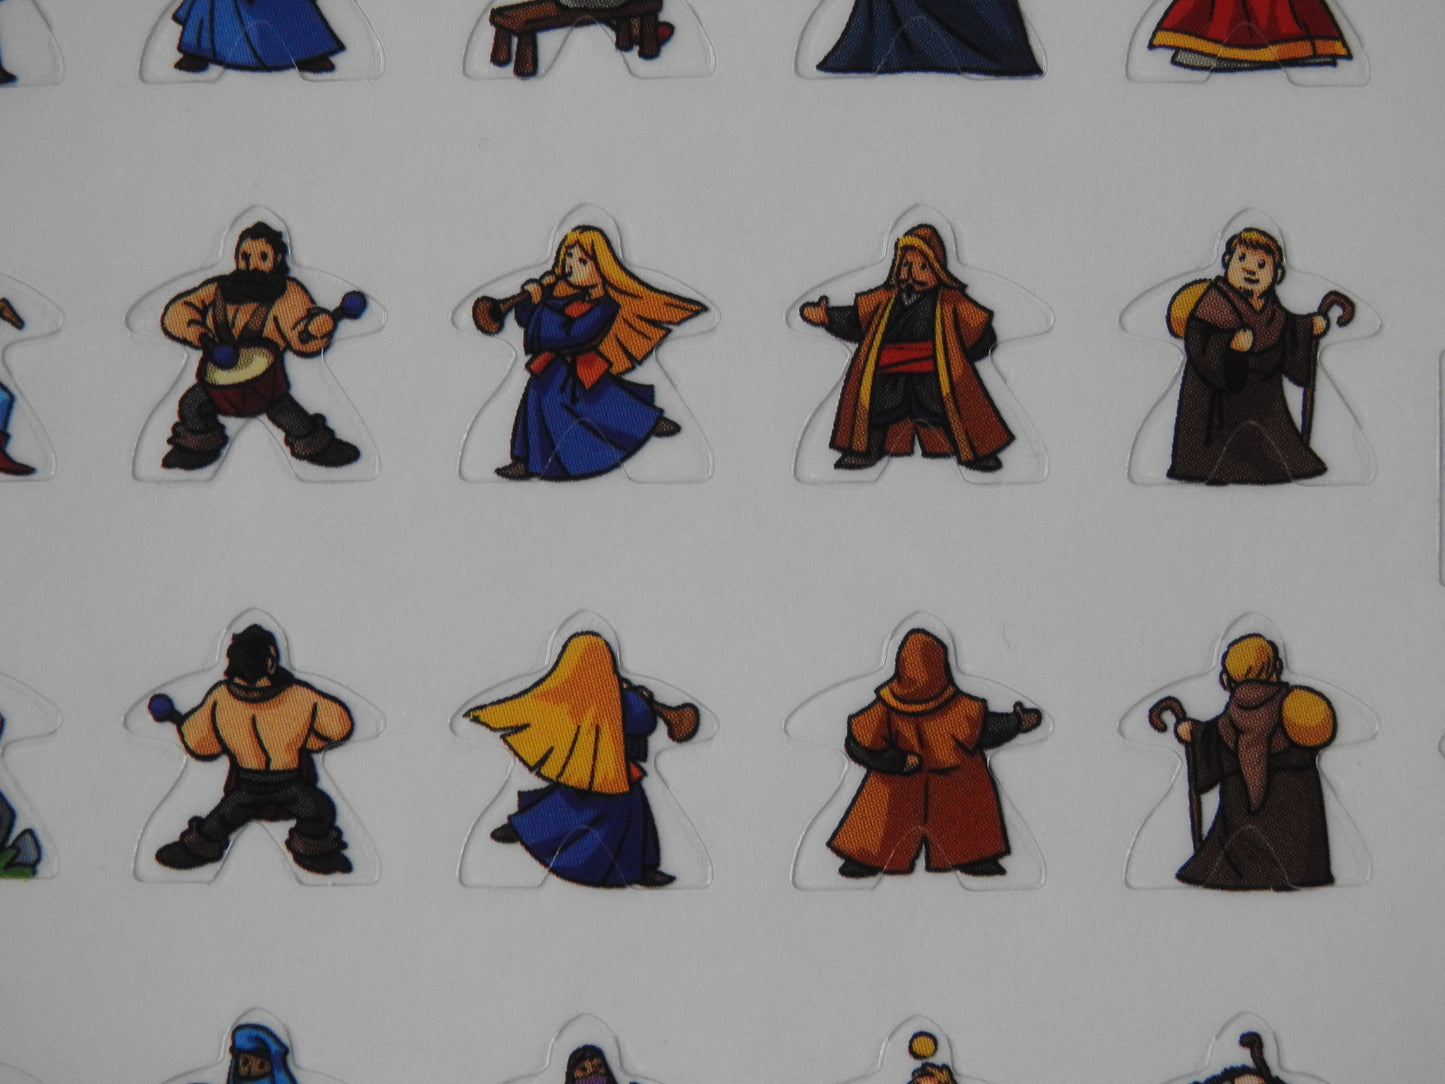 Close-up view of some of the meeple stickers, including a lady playing a pipe and a travelling monk.